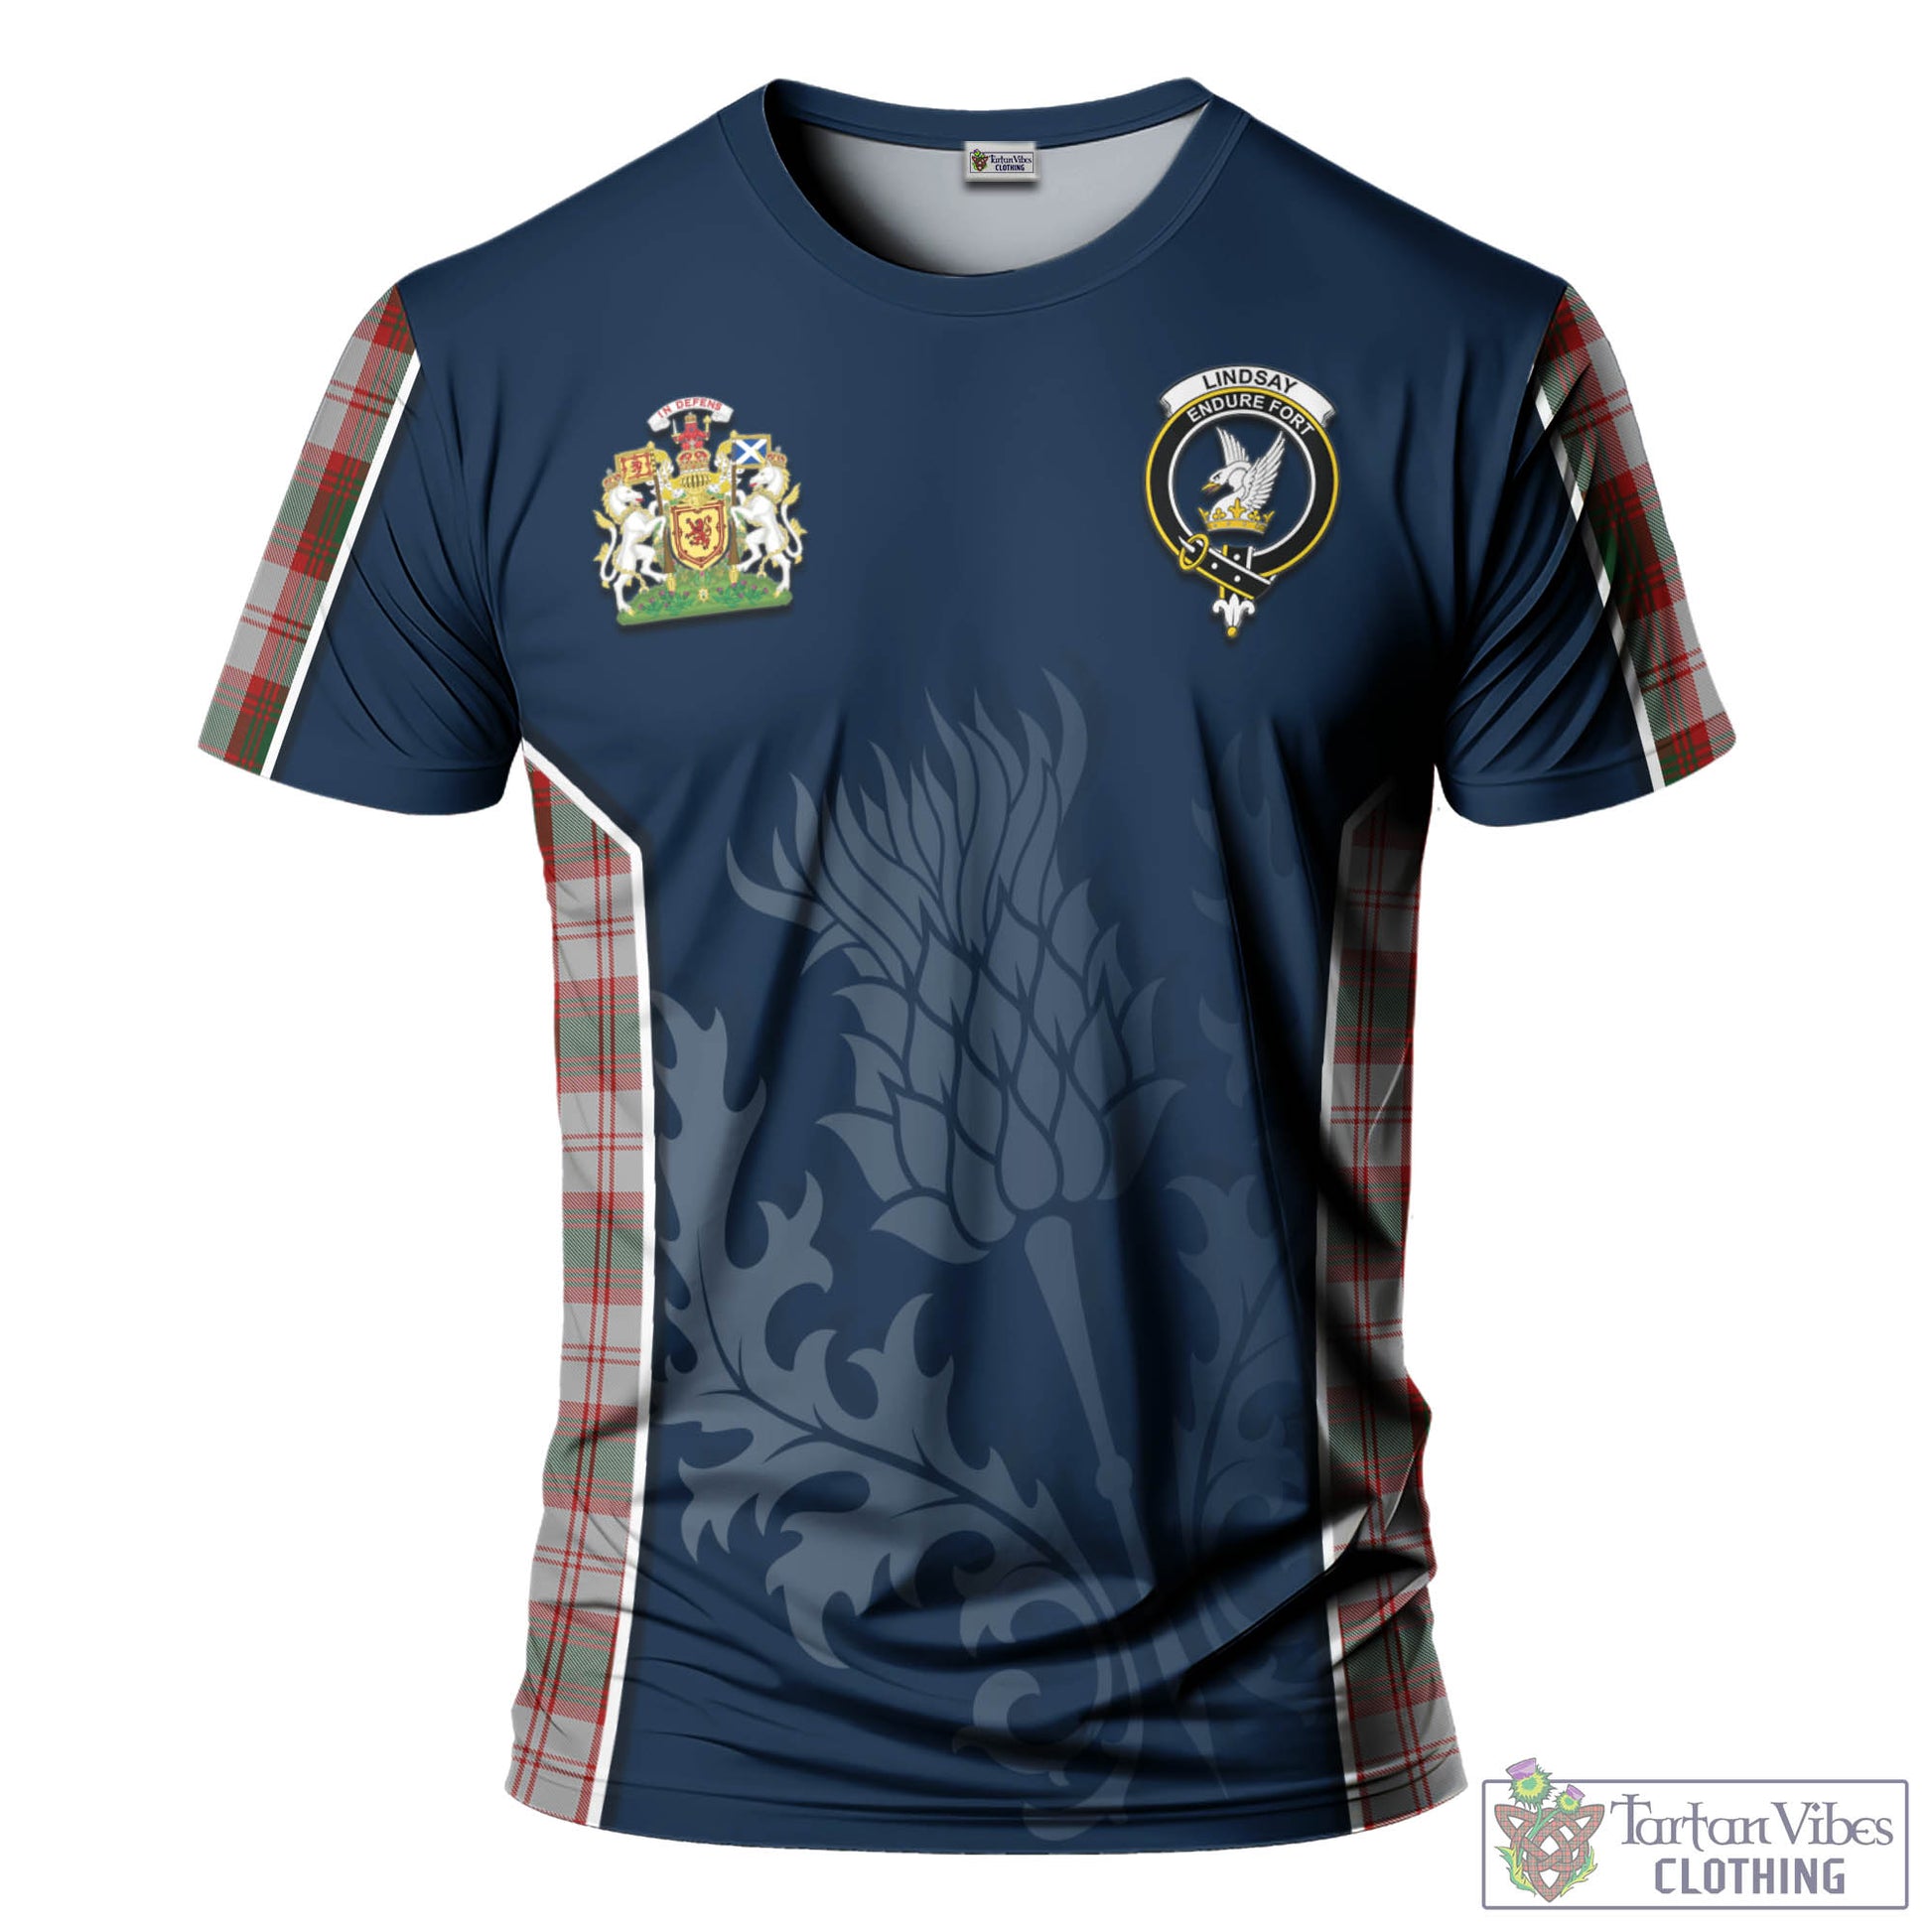 Tartan Vibes Clothing Lindsay Dress Red Tartan T-Shirt with Family Crest and Scottish Thistle Vibes Sport Style